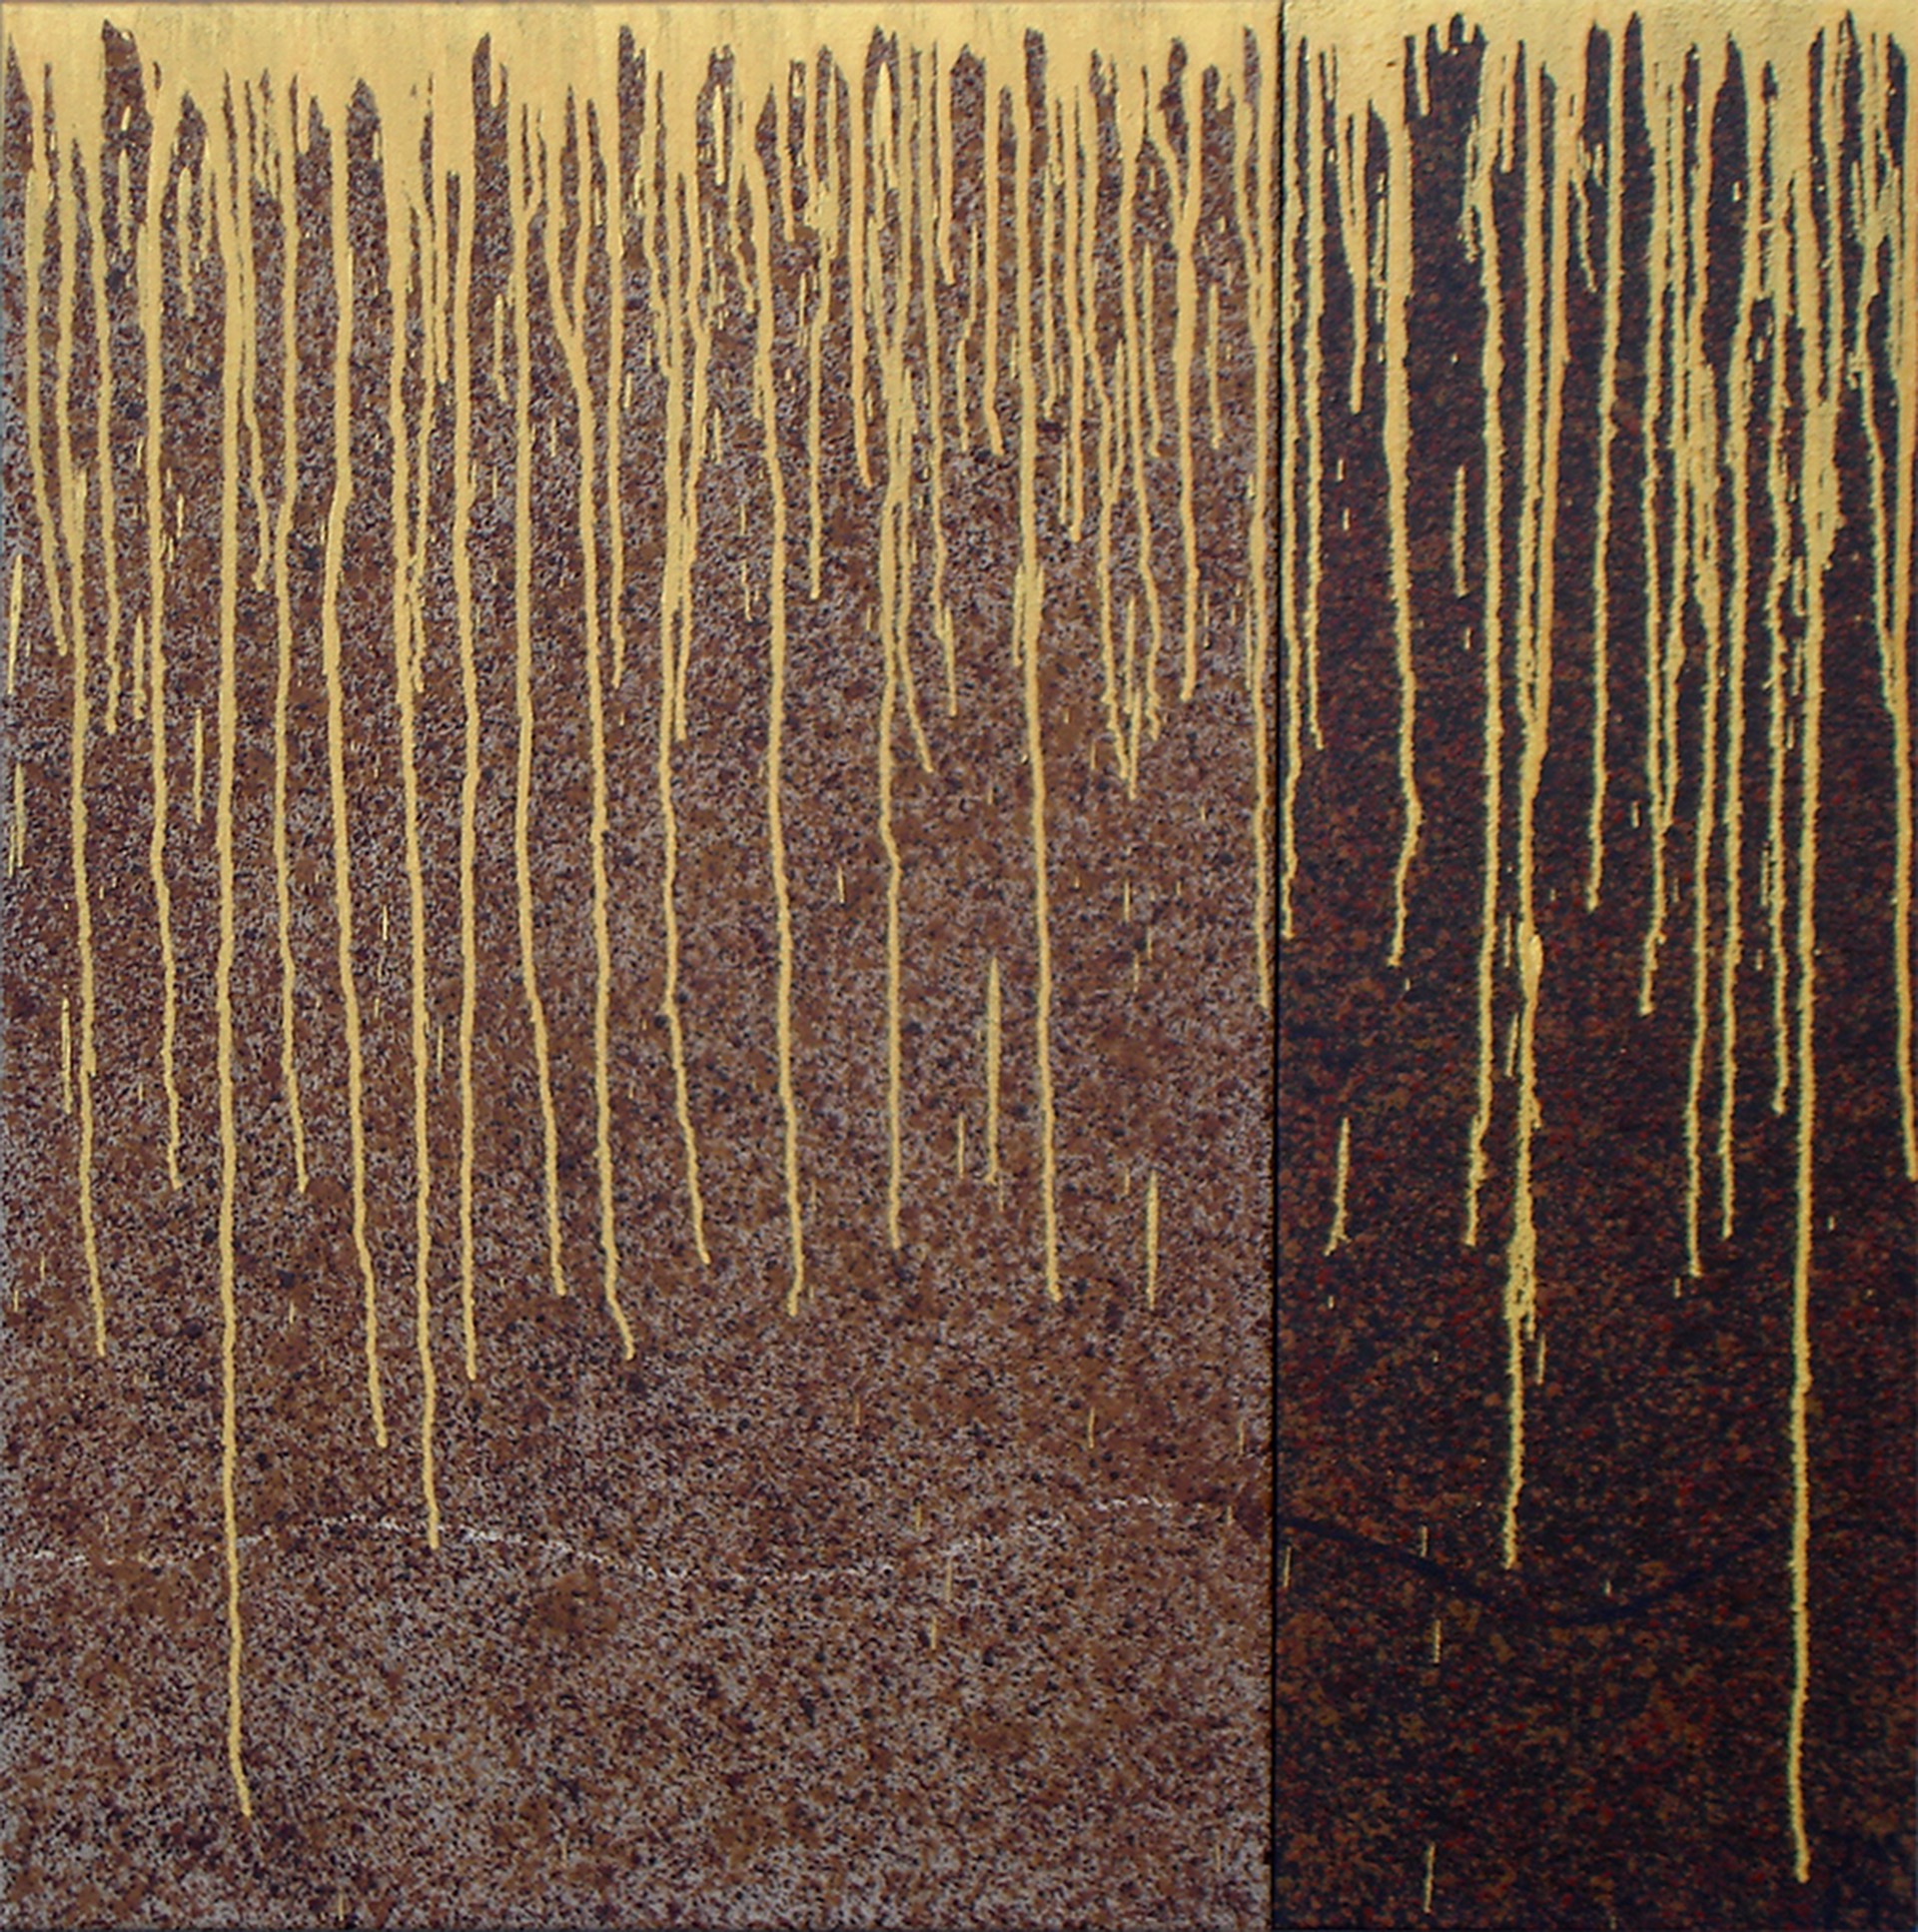 Day and Night [Diptych] by Javier Manrique